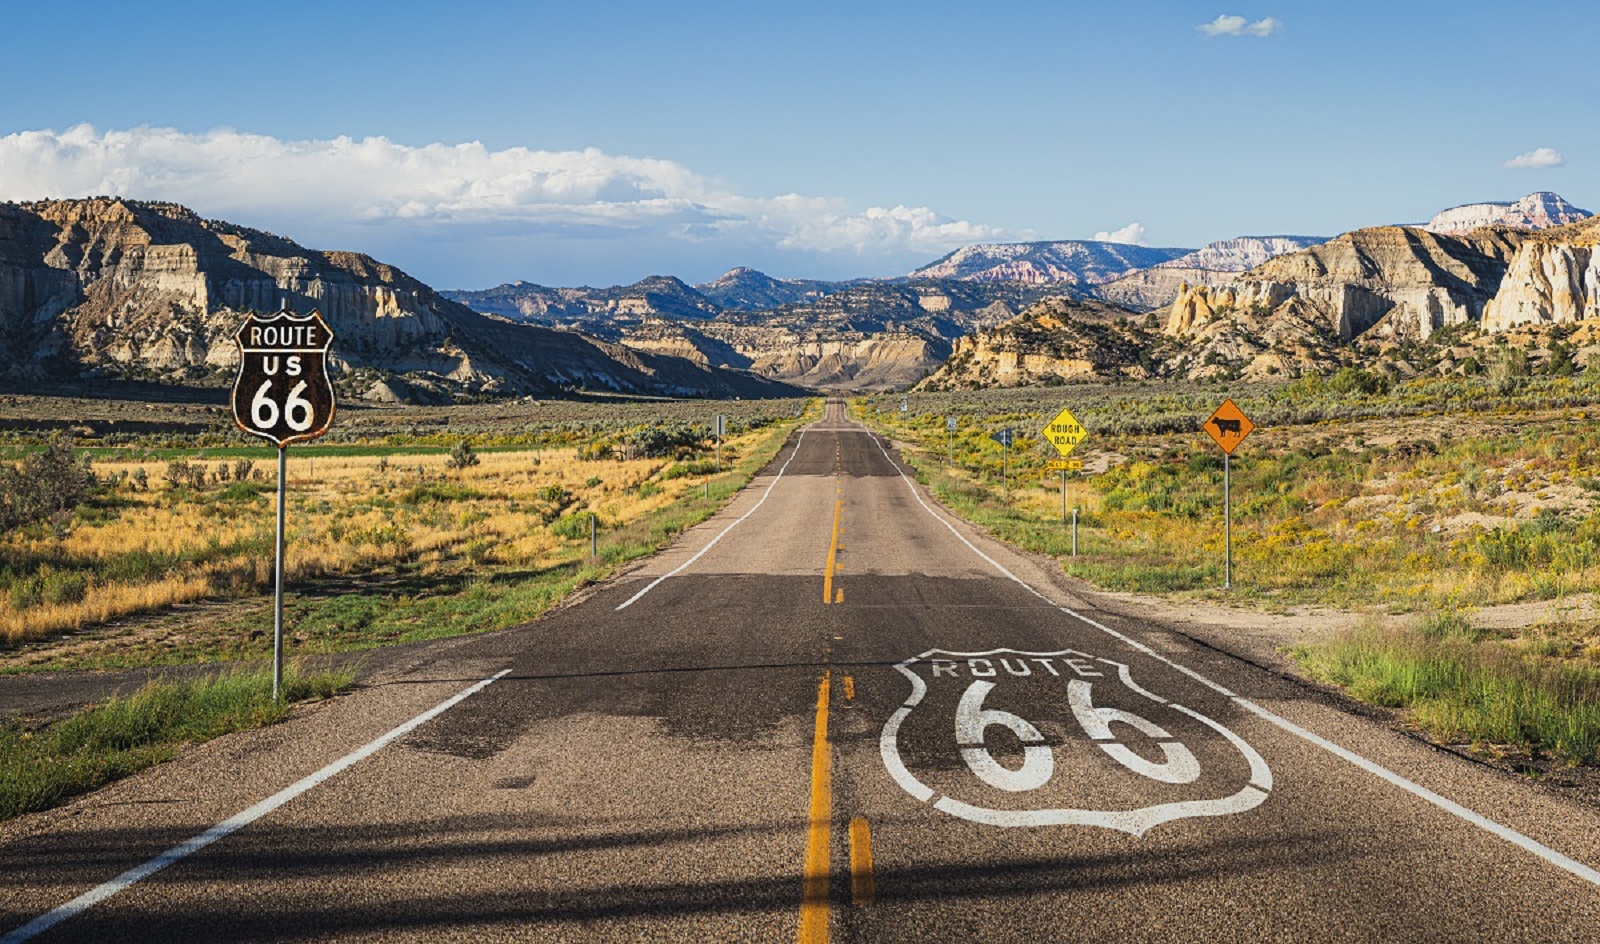 <p class="wp-caption-text">Image Credit: Shutterstock / Nyokki</p>  <p><span>Take a trip down memory lane on historic Route 66, the legendary highway that stretches from Illinois to California. Along the way, you’ll pass through charming small towns, quirky roadside attractions, and iconic landmarks that capture the spirit of Americana.</span></p>